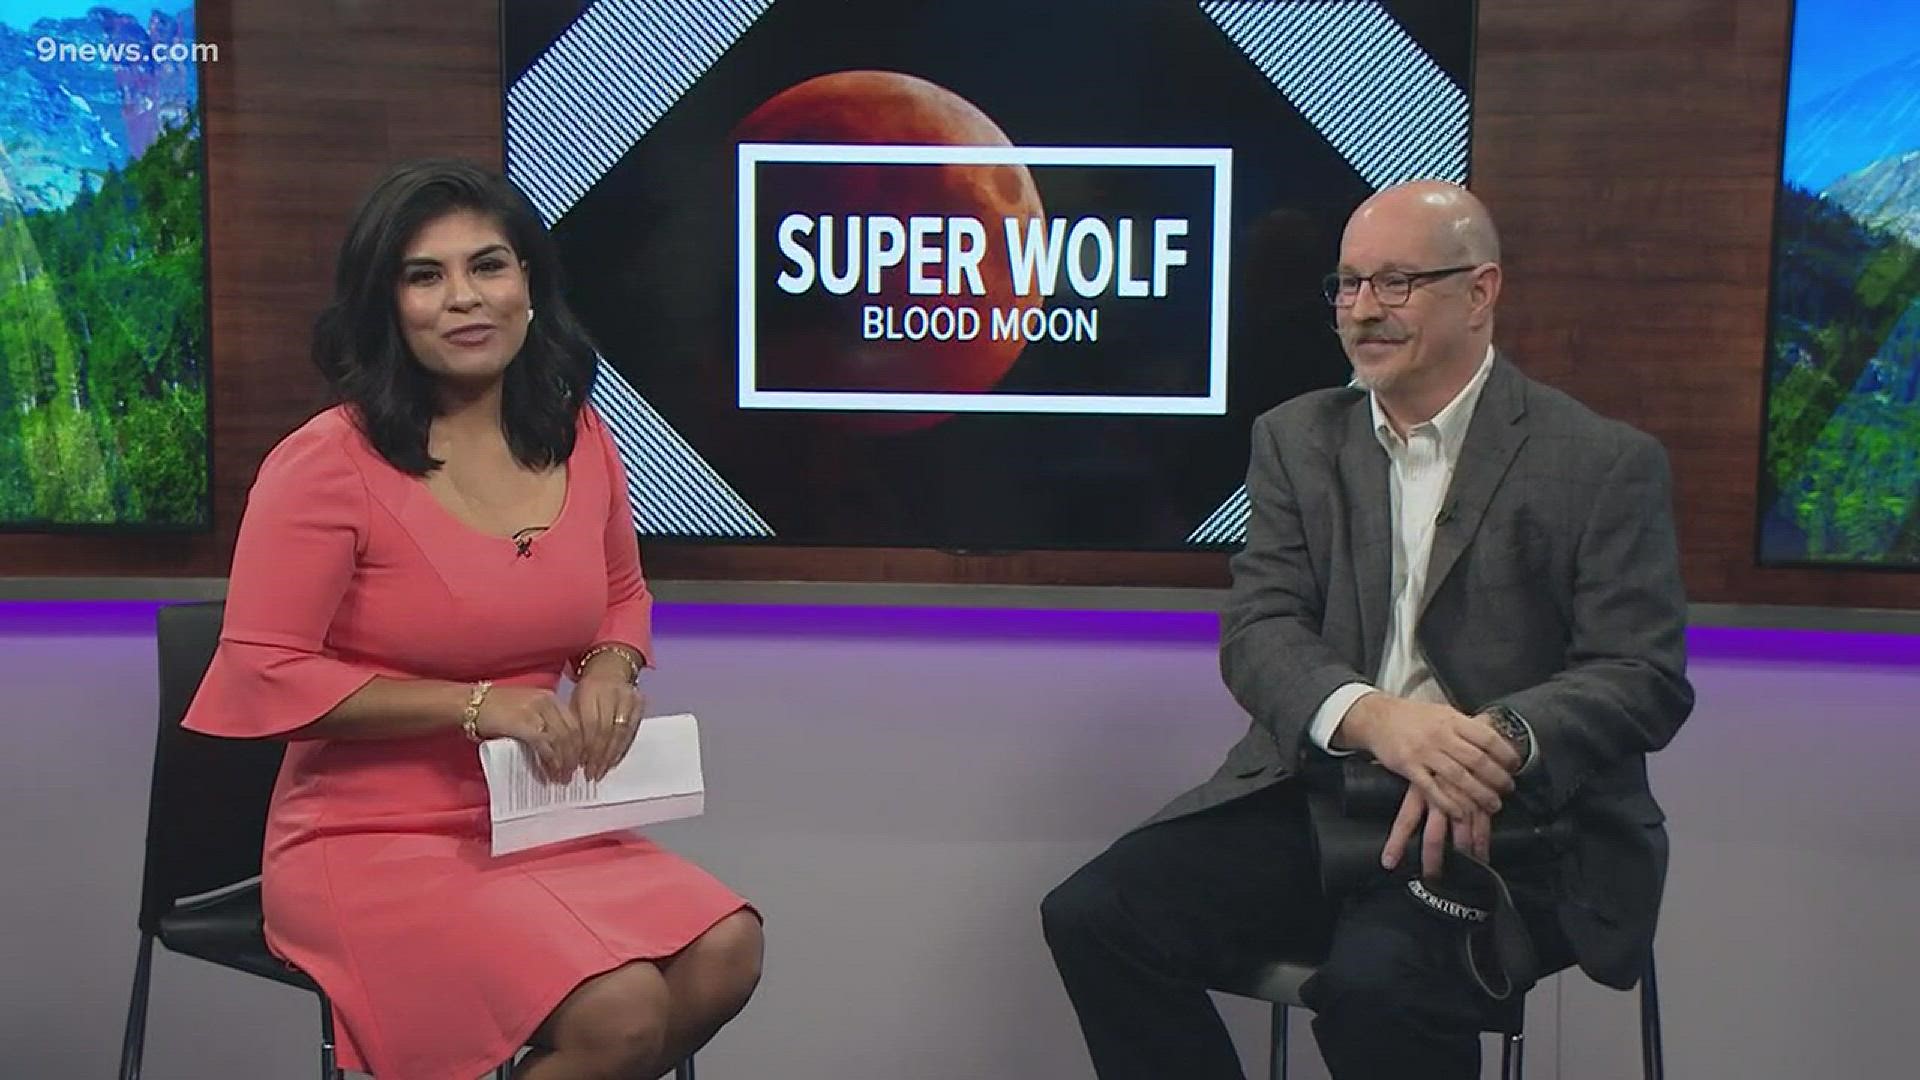 Ed Ladner from Denver's Astronomical Society joined us at 9NEWS at 9 5 p.m. to explain tonight's Super Wolf Blood Moon.